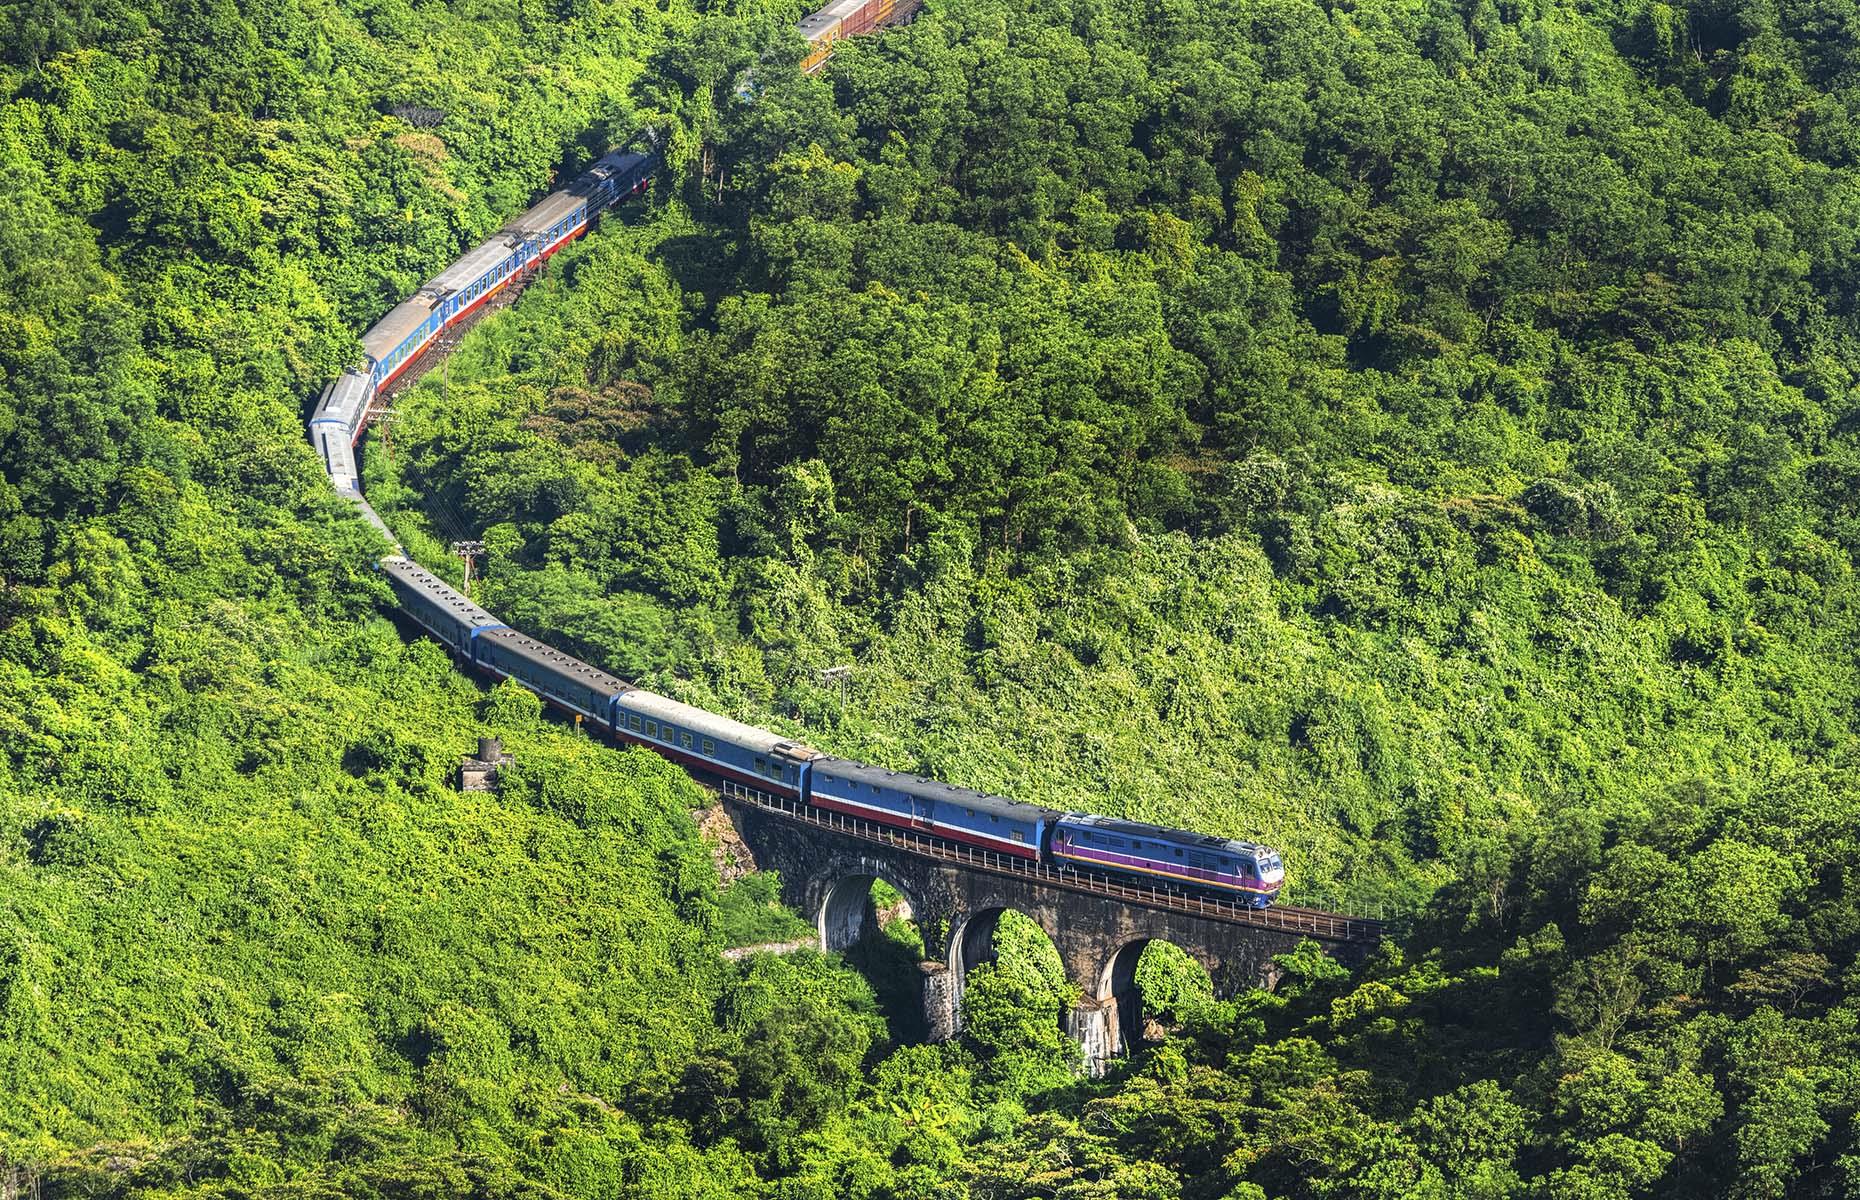 <p>Crossing two continents, the incredible journey <a href="https://www.tripzilla.com/portugal-to-singapore-by-land-train-easy-guide/110412">from Porto in Portugal to Singapore</a> is the longest you could possibly do by train alone. Covering an approximate distance of 10,000 miles (16,000km), the route leads from Porto to Warsaw in Poland before traveling east to Beijing in China. From there the journey turns south to Vietnam and reaches Singapore via Cambodia and Thailand. The full journey would cost around $7,000 and would take at least 12 days to complete.</p>